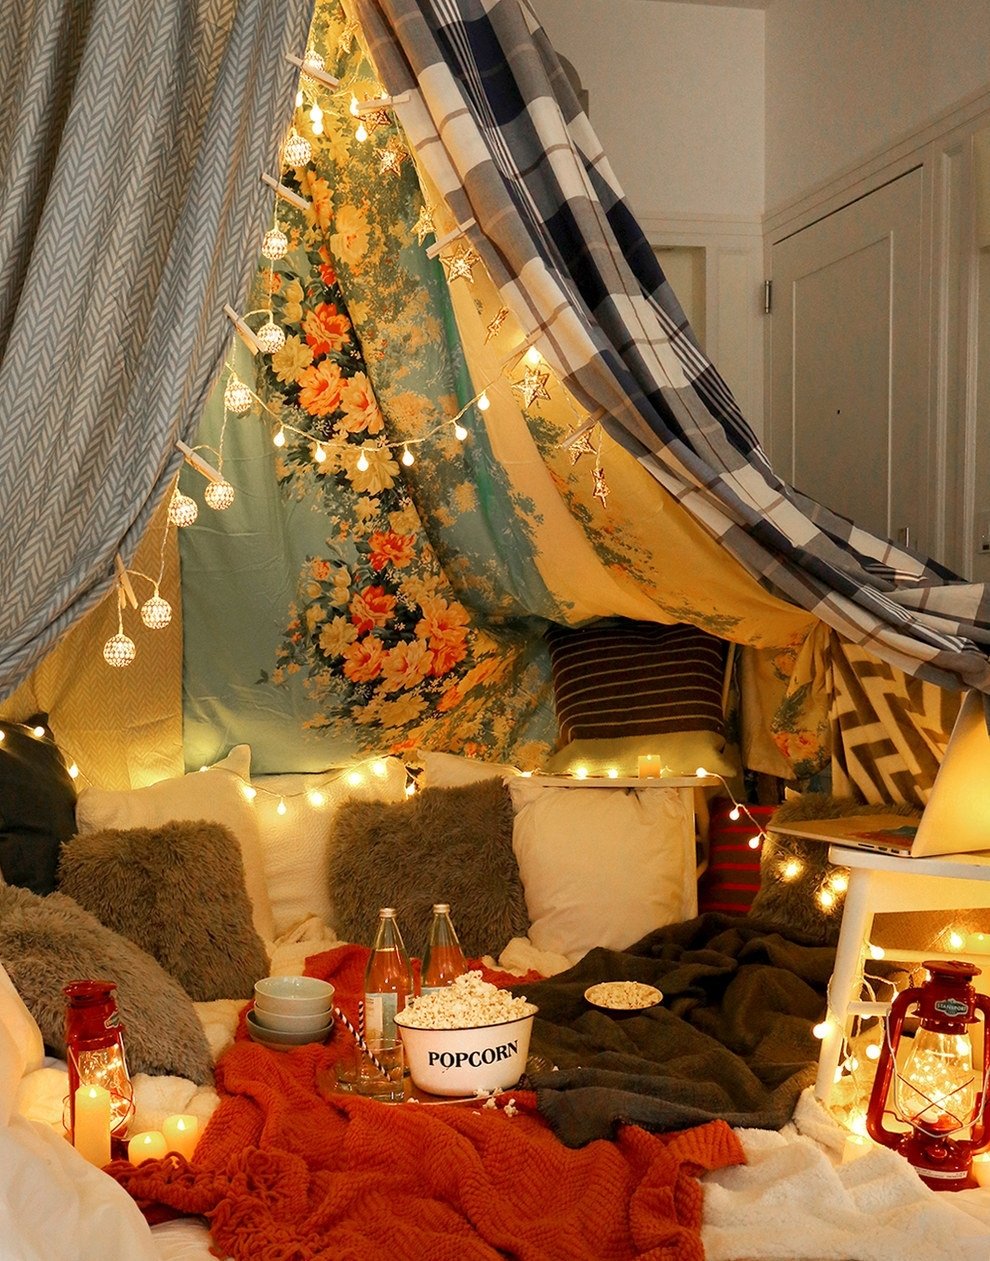 10 Unique Romantic At Home Date Ideas no babysitter required 5 valentines day date ideas at home 1 2022